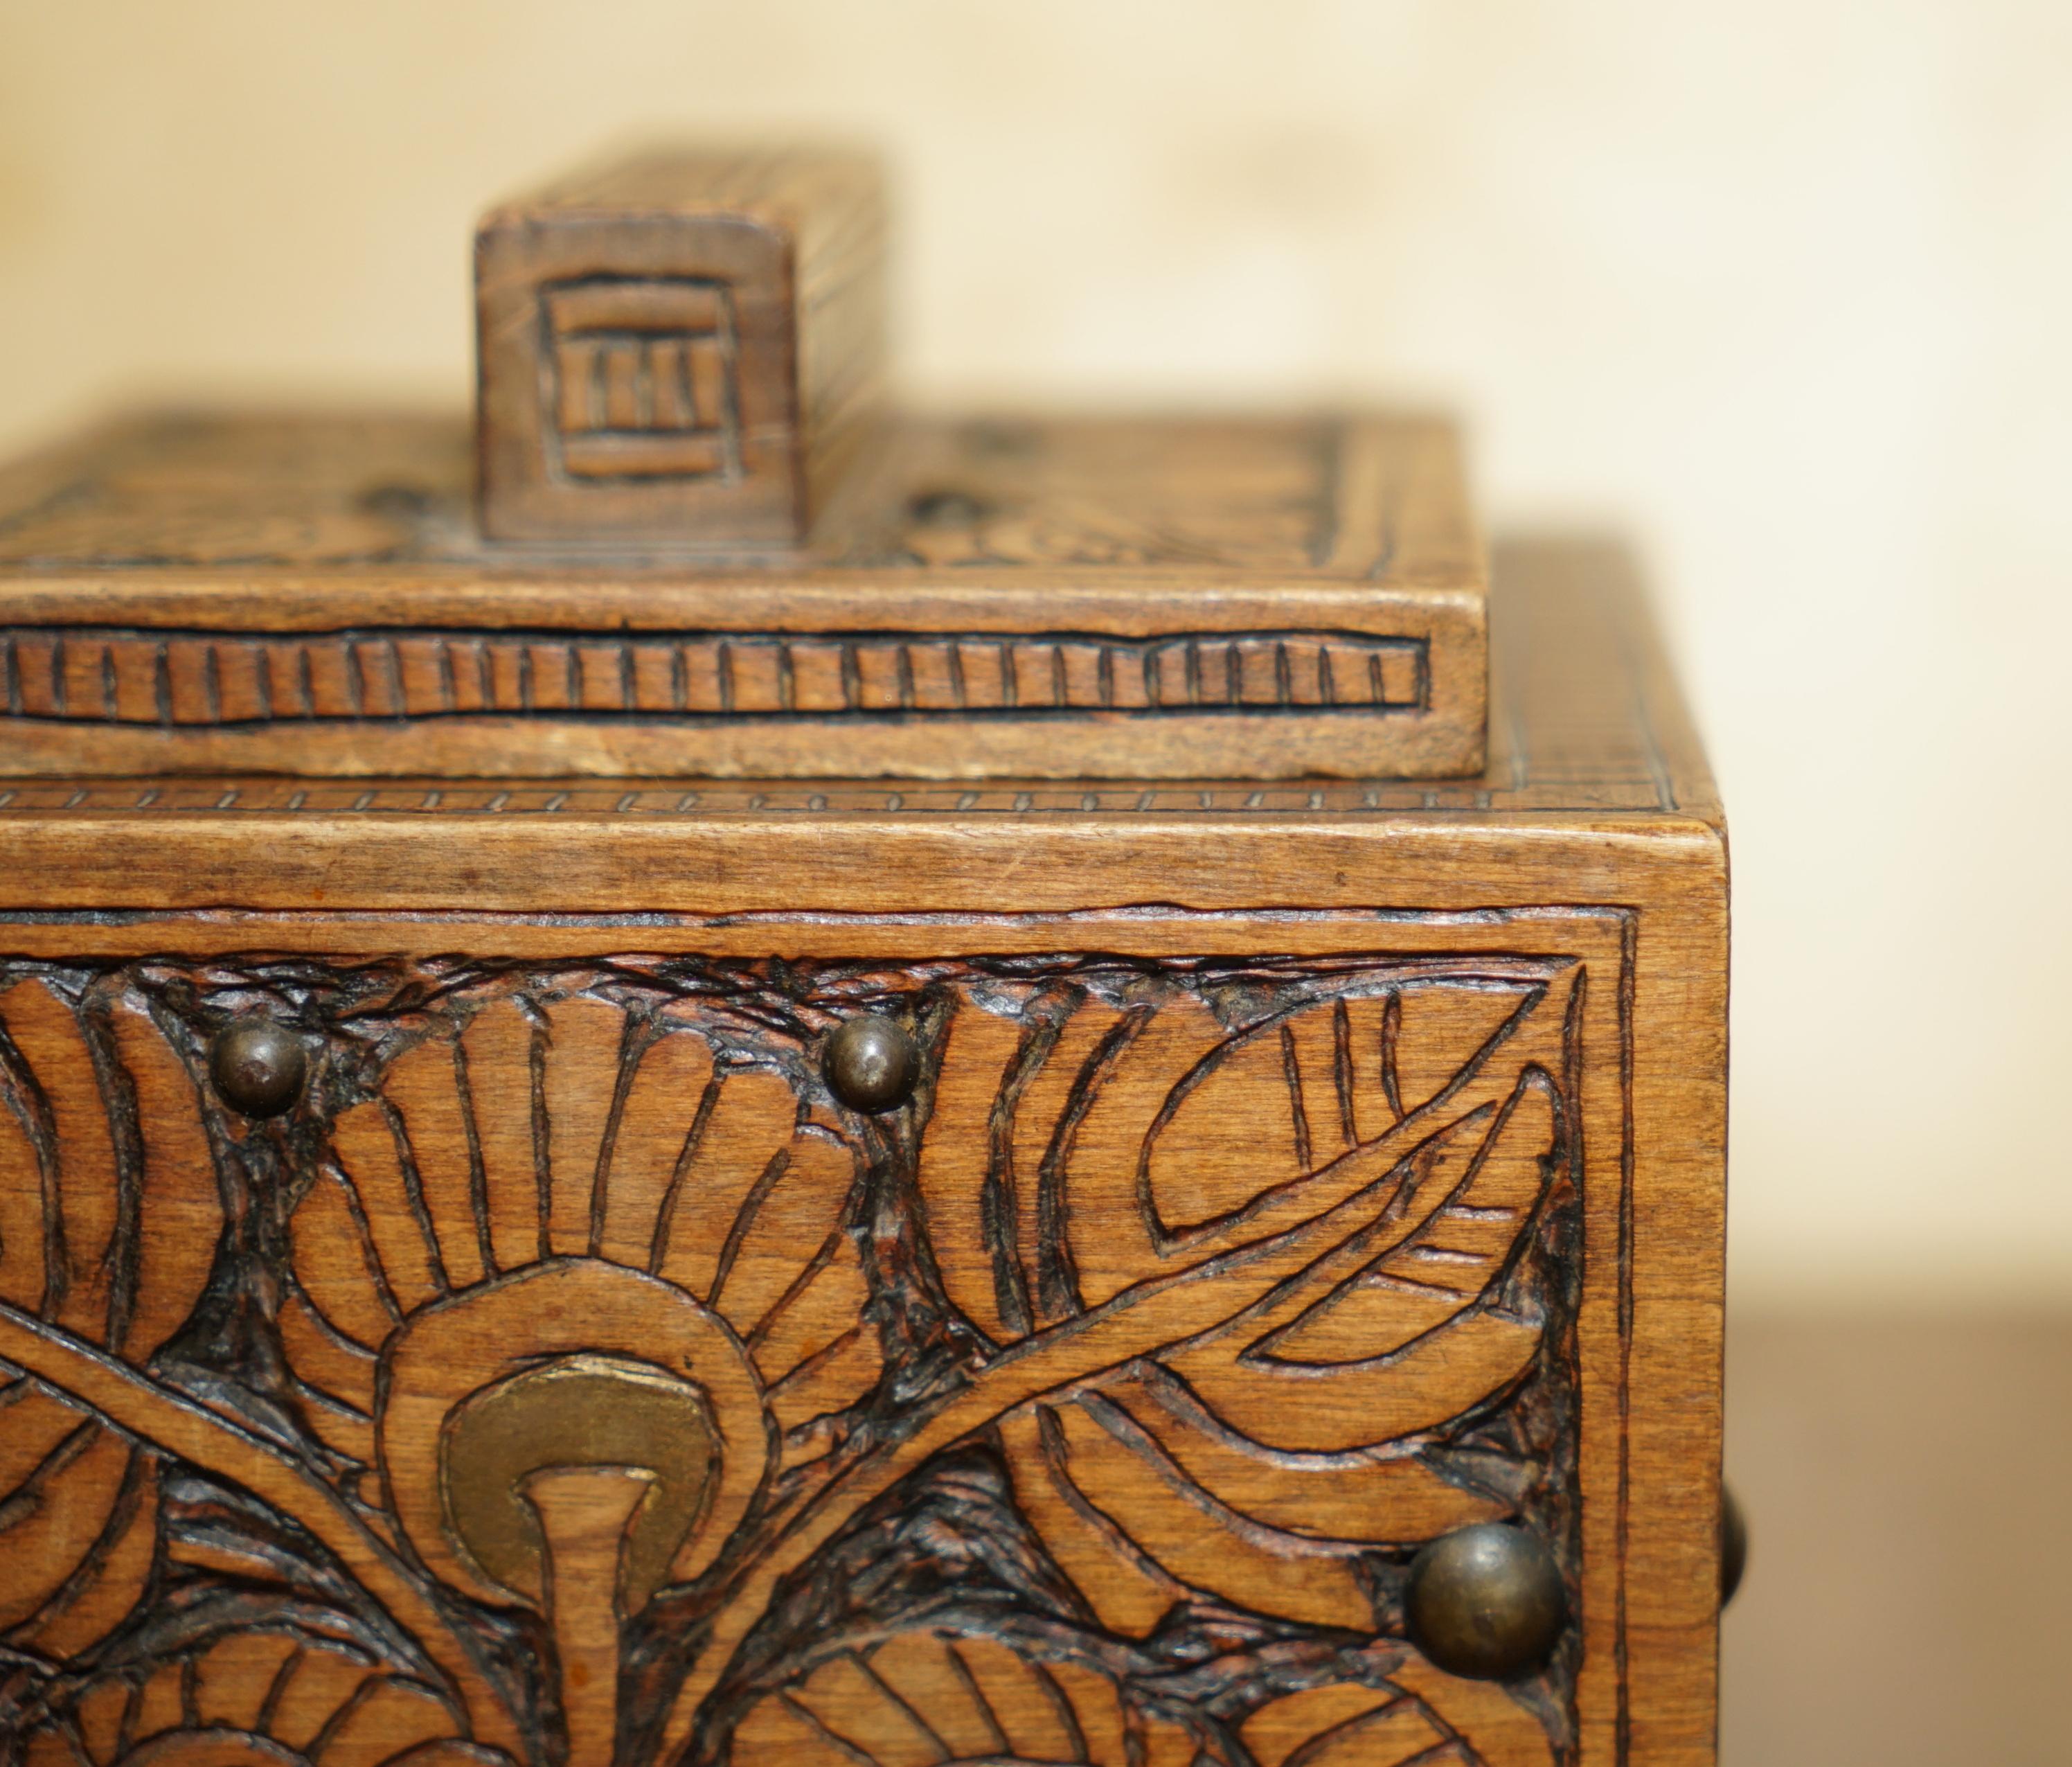 Hand-Crafted ViNTAGE HAND CARVED WOODEN TRINKET BOX WITH ANTIQUED STUDS & GOLD GILDING